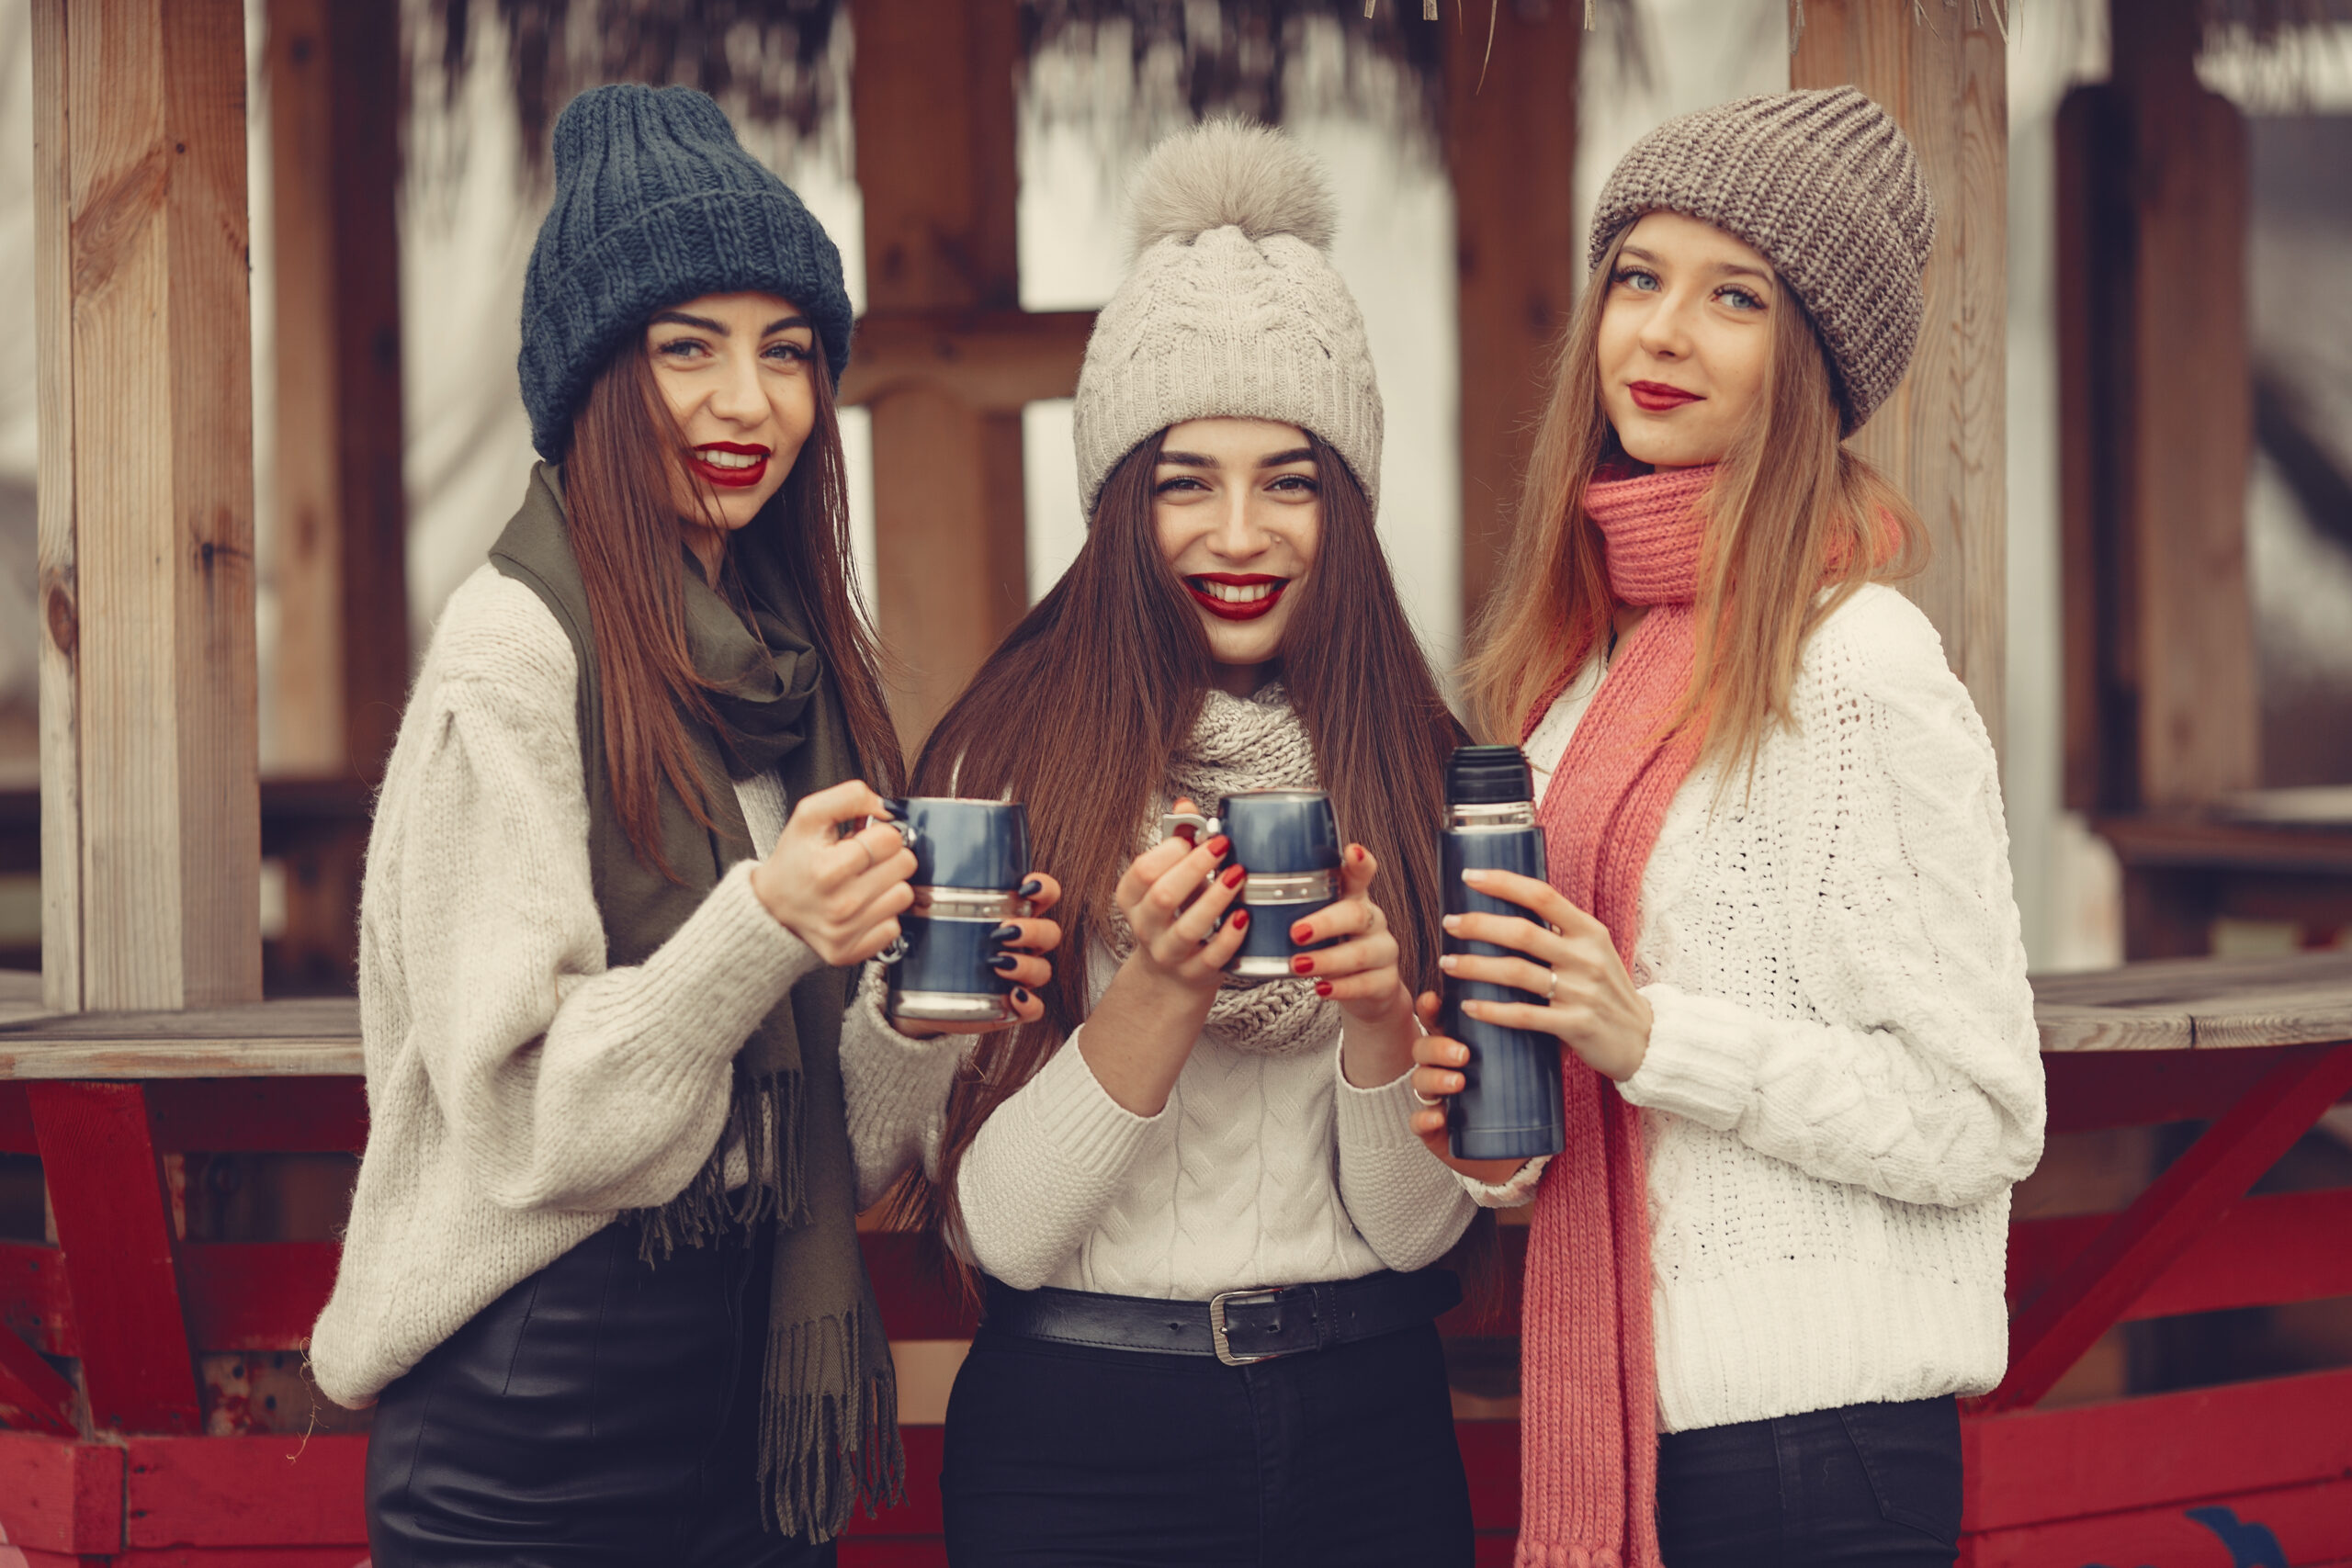 winter hair care tips, hair care in winter, hair care, hair care idea, hair care advice, take care of your hair, how to keep hair hydrated in winter, winter care, beautiful hair in winter